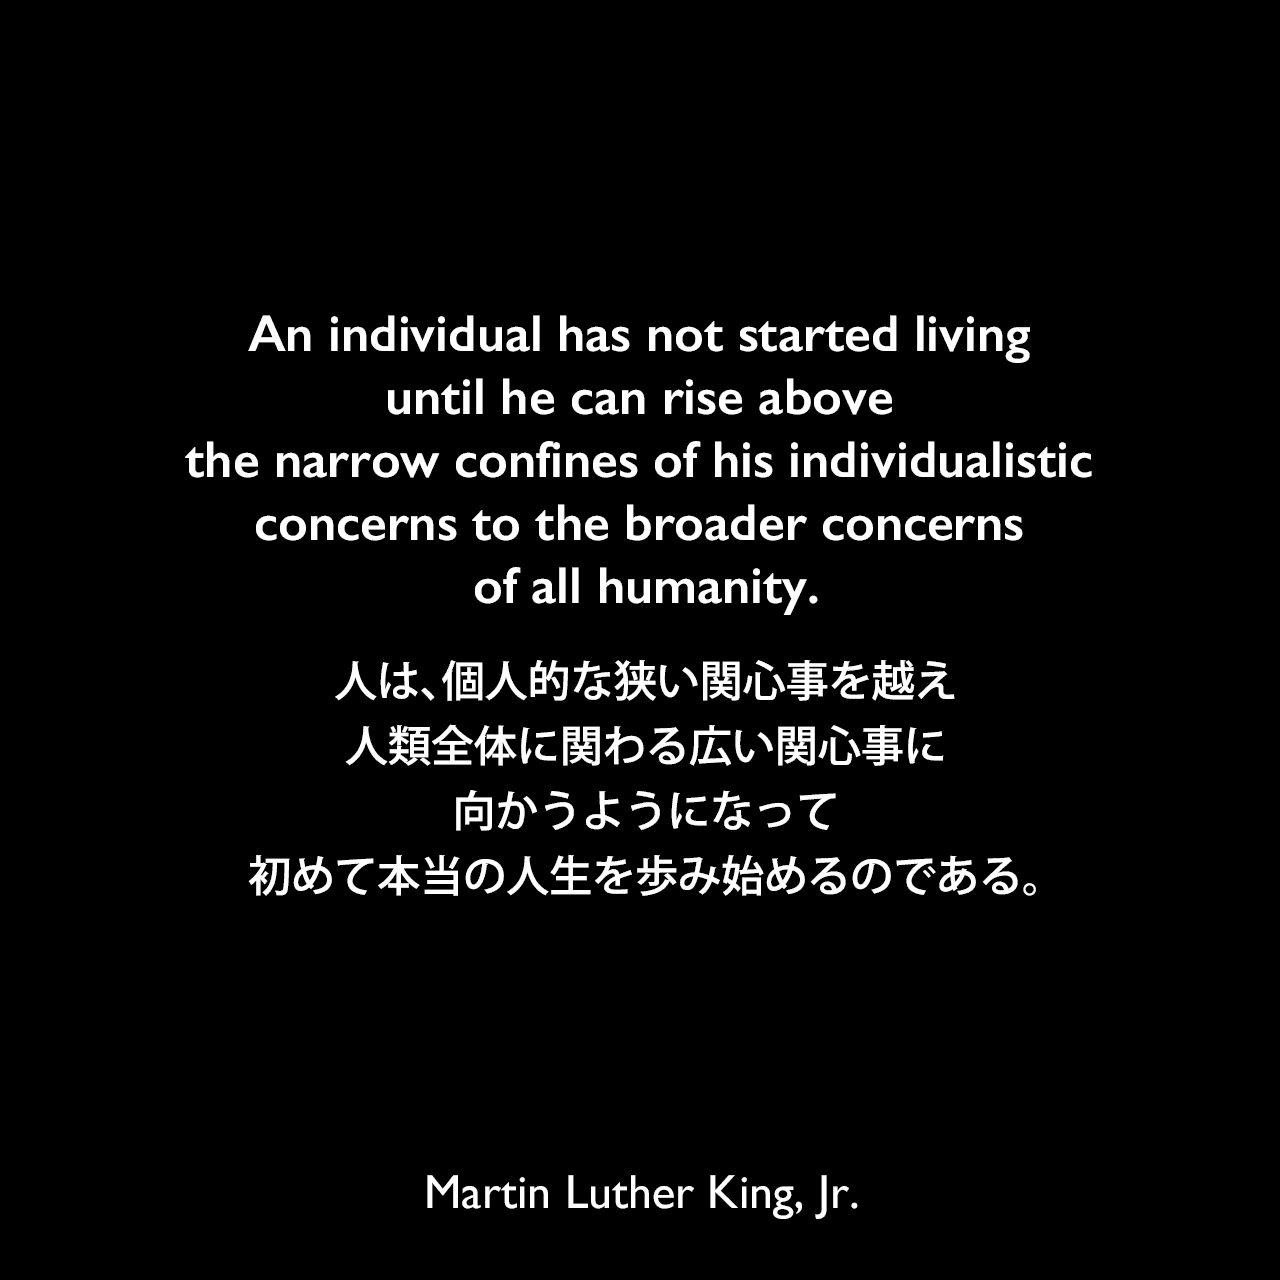 An individual has not started living until he can rise above the narrow confines of his individualistic concerns to the broader concerns of all humanity.人は、個人的な狭い関心事を越え、人類全体に関わる広い関心事に向かうようになって初めて本当の人生を歩み始めるのである。- 1957年の説教「Conquering Self-centeredness」よりMartin Luther King, Jr.